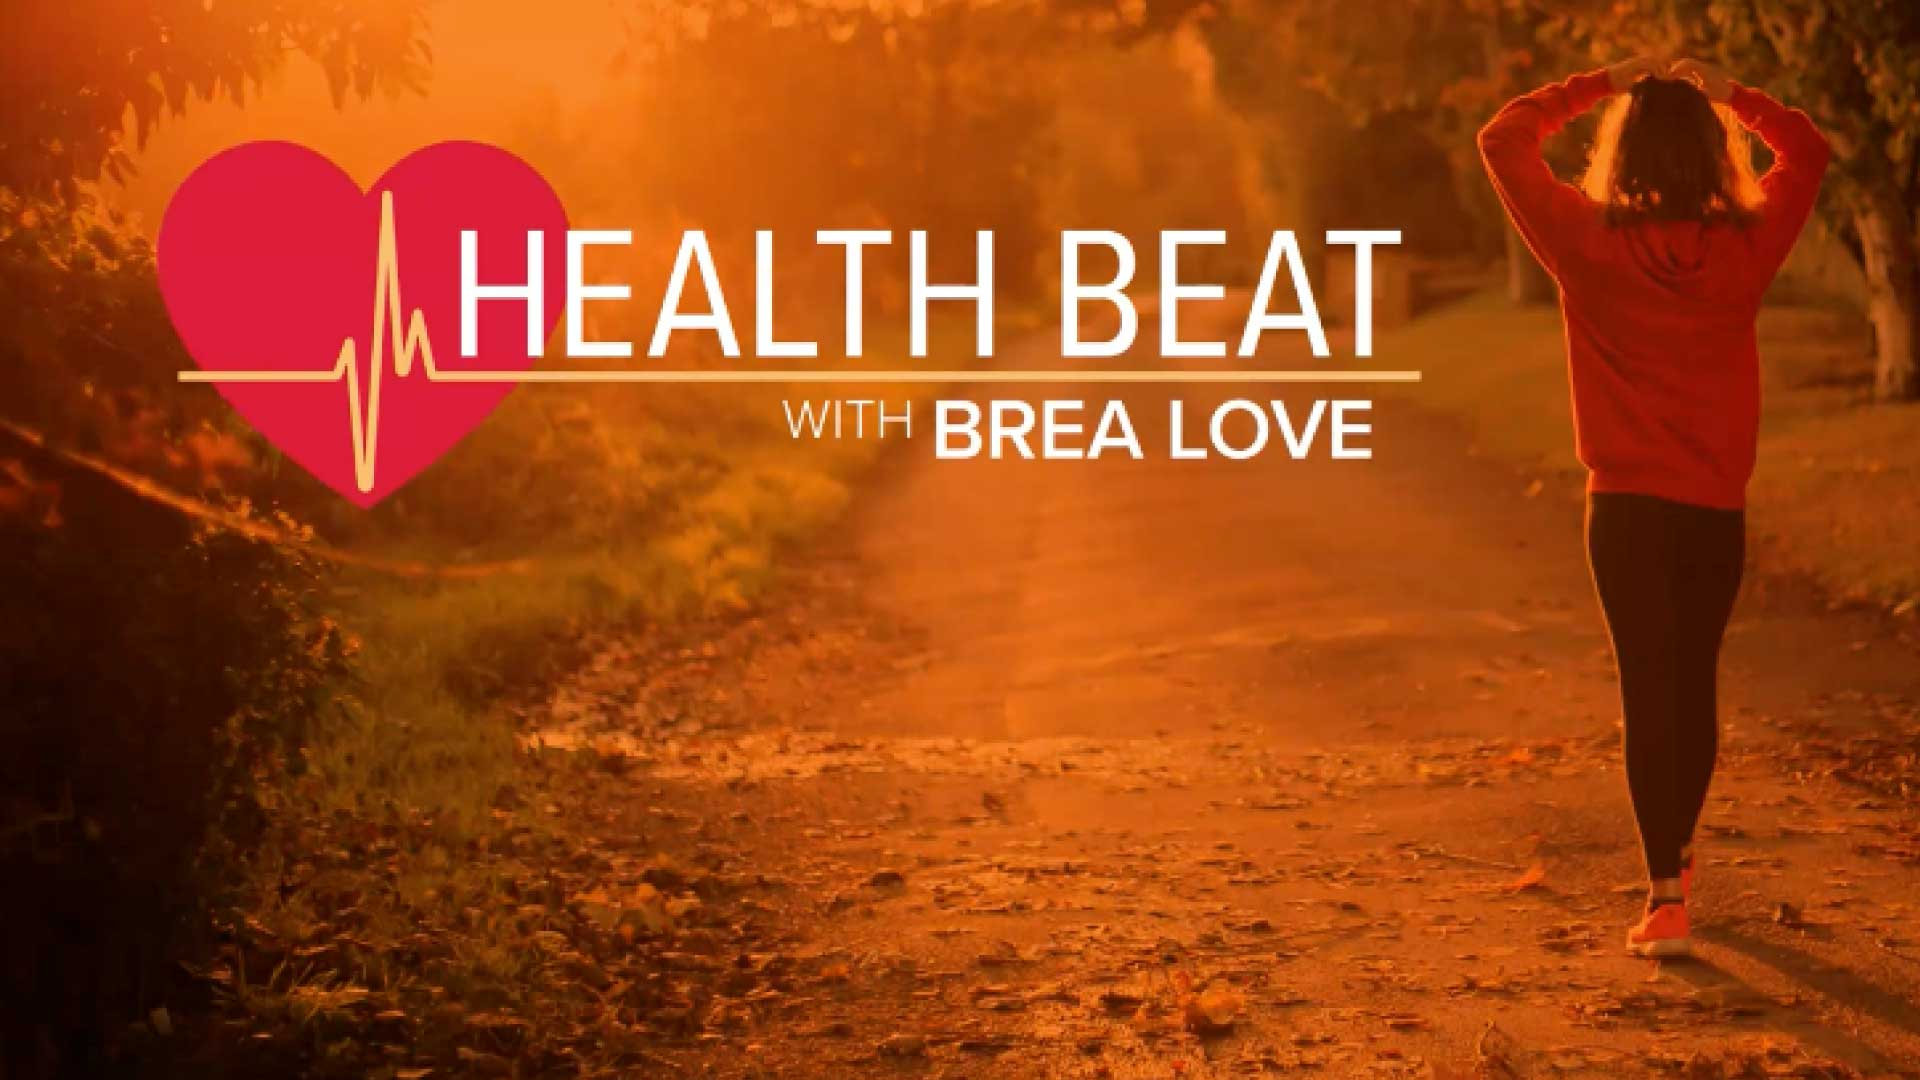 Thumbnail image of STAC news on Health Beat with Brea Love.